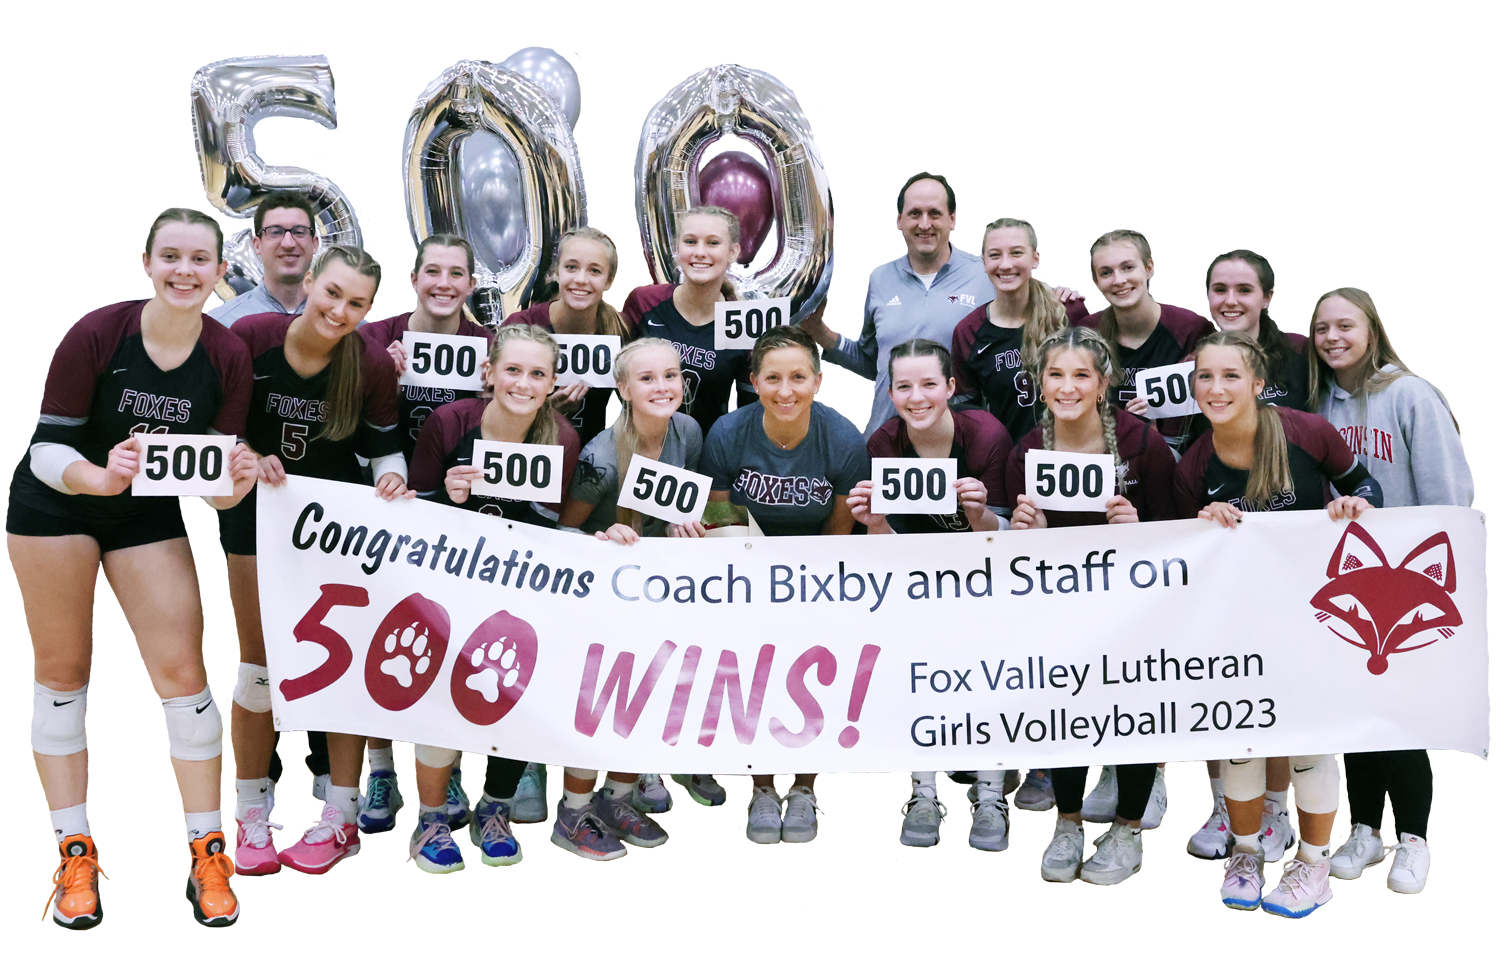 Volleyball team, each holding the number 500, Mrs. Bixby in the middle of the group, a 500 wins banner in the front and balloons in the back